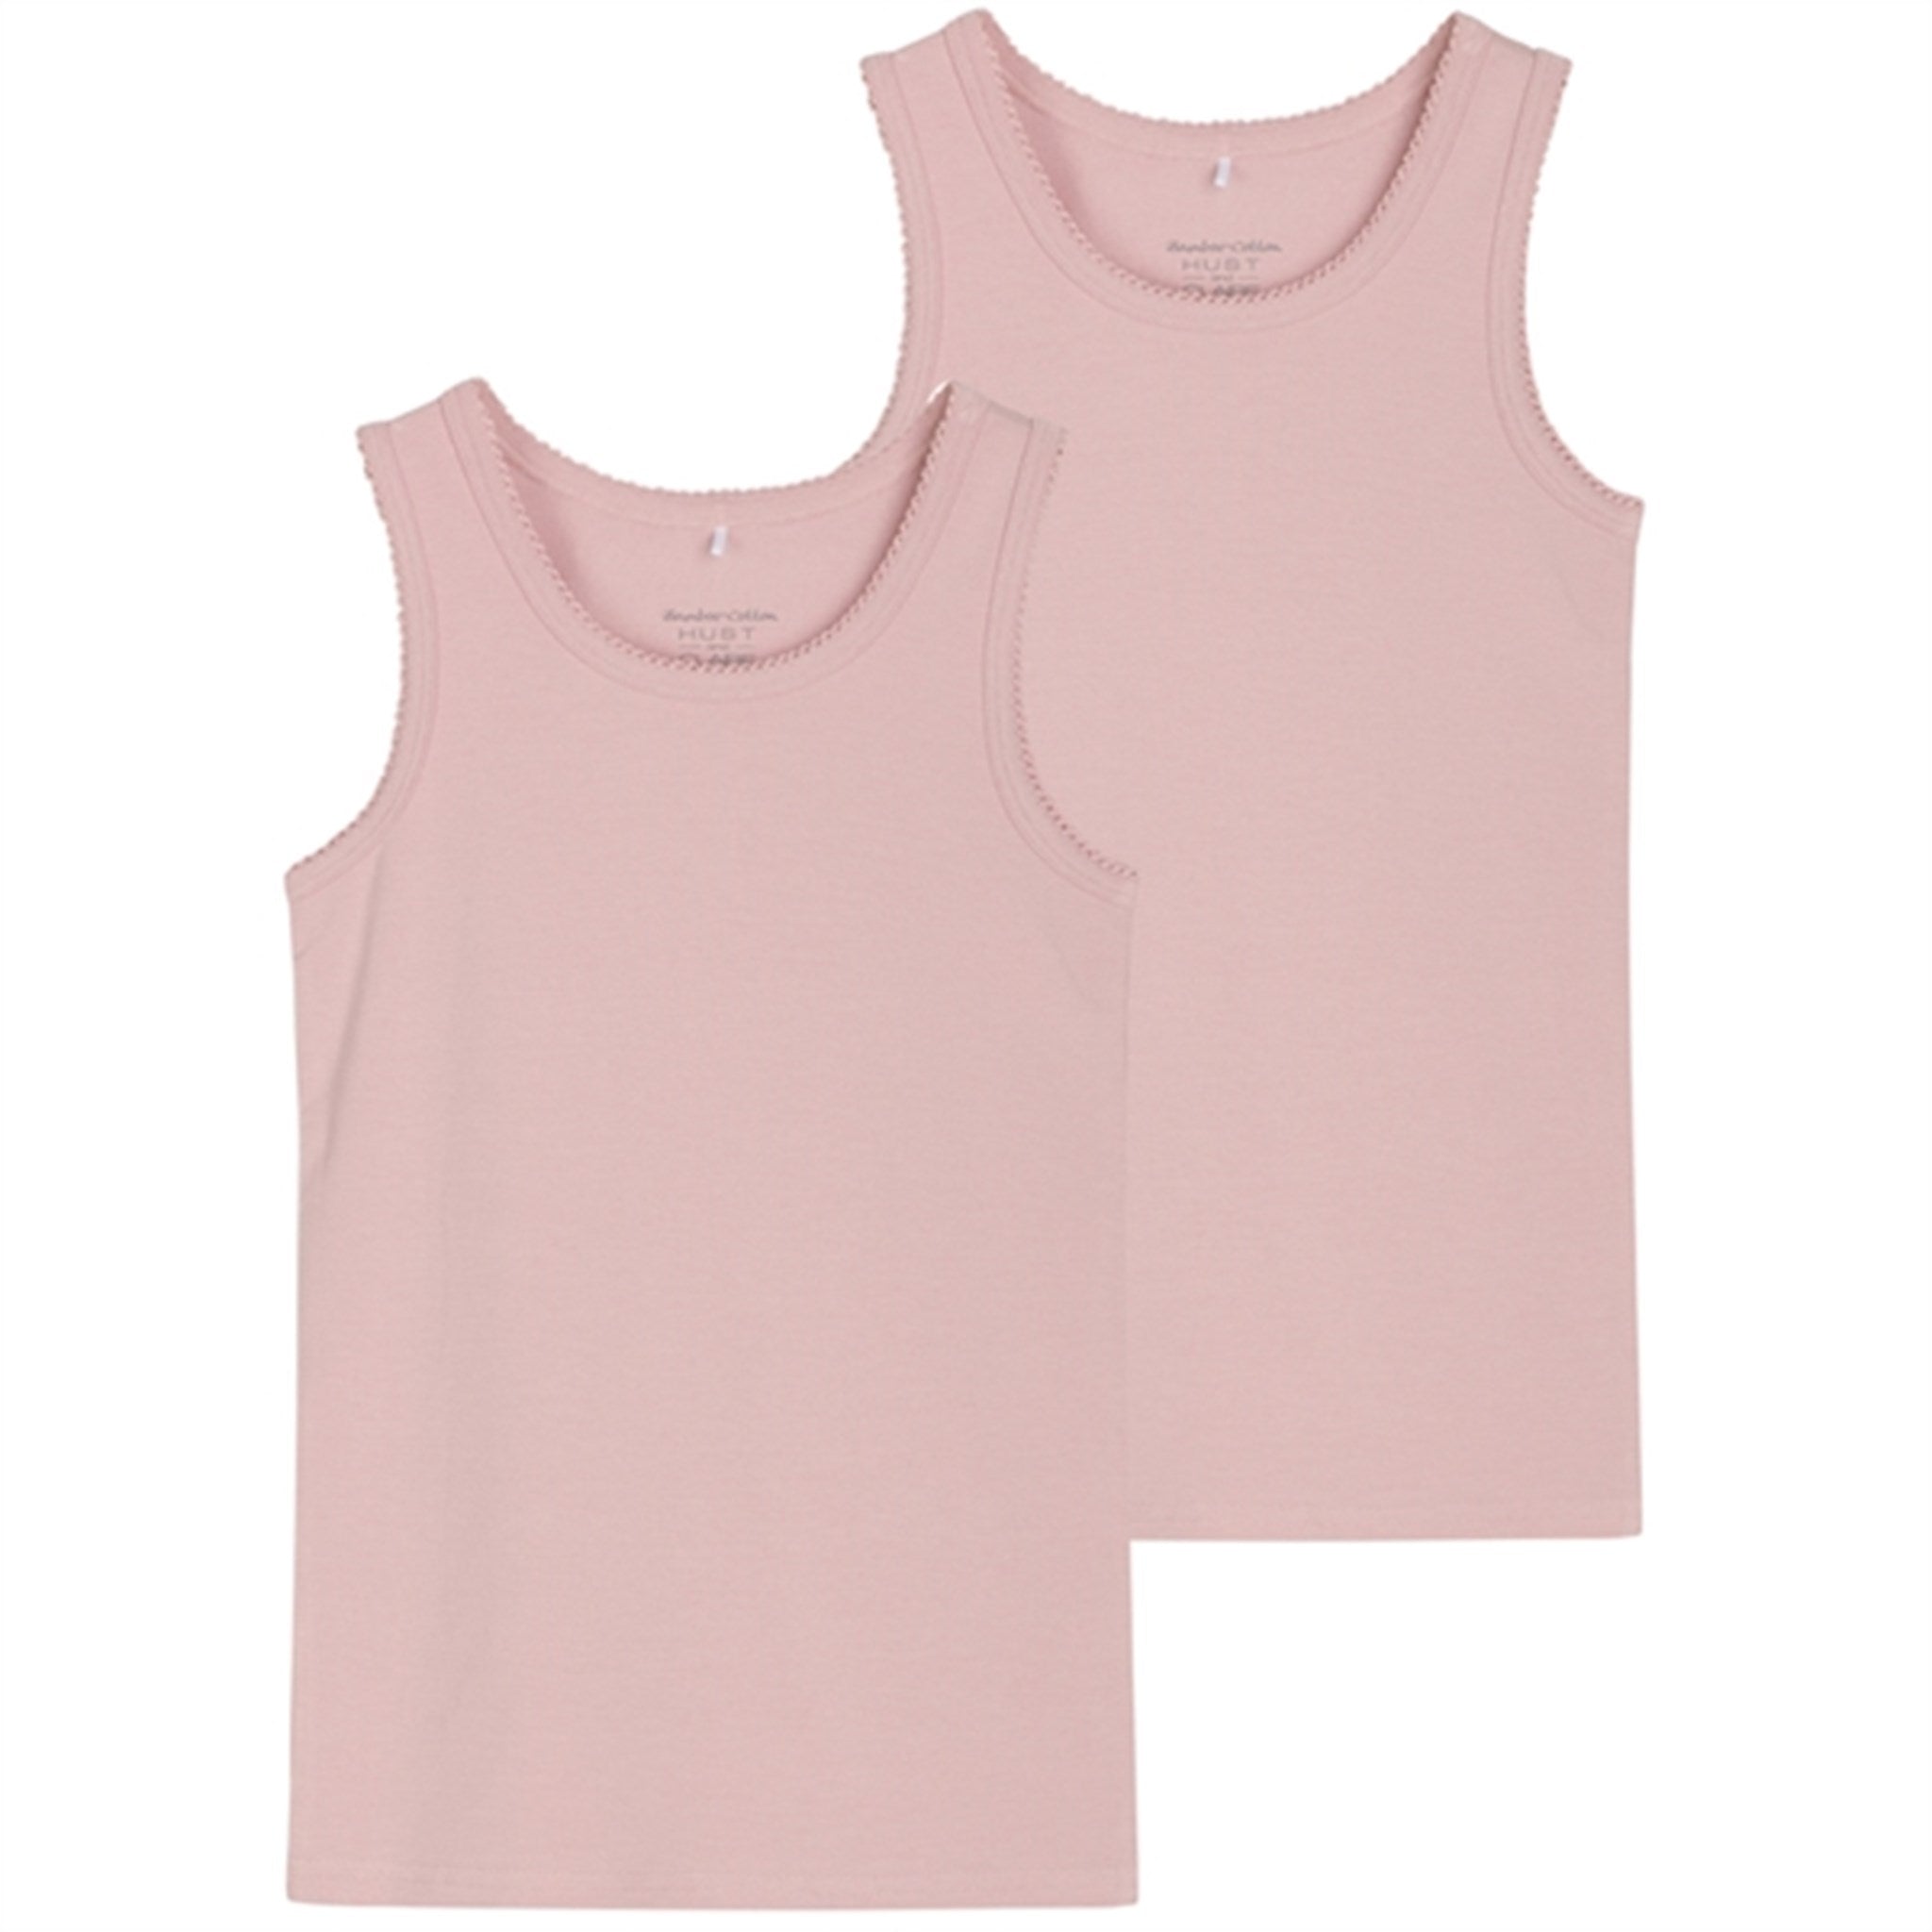 Hust & Claire Dusty Rose Flicka Tank Top 2-pak